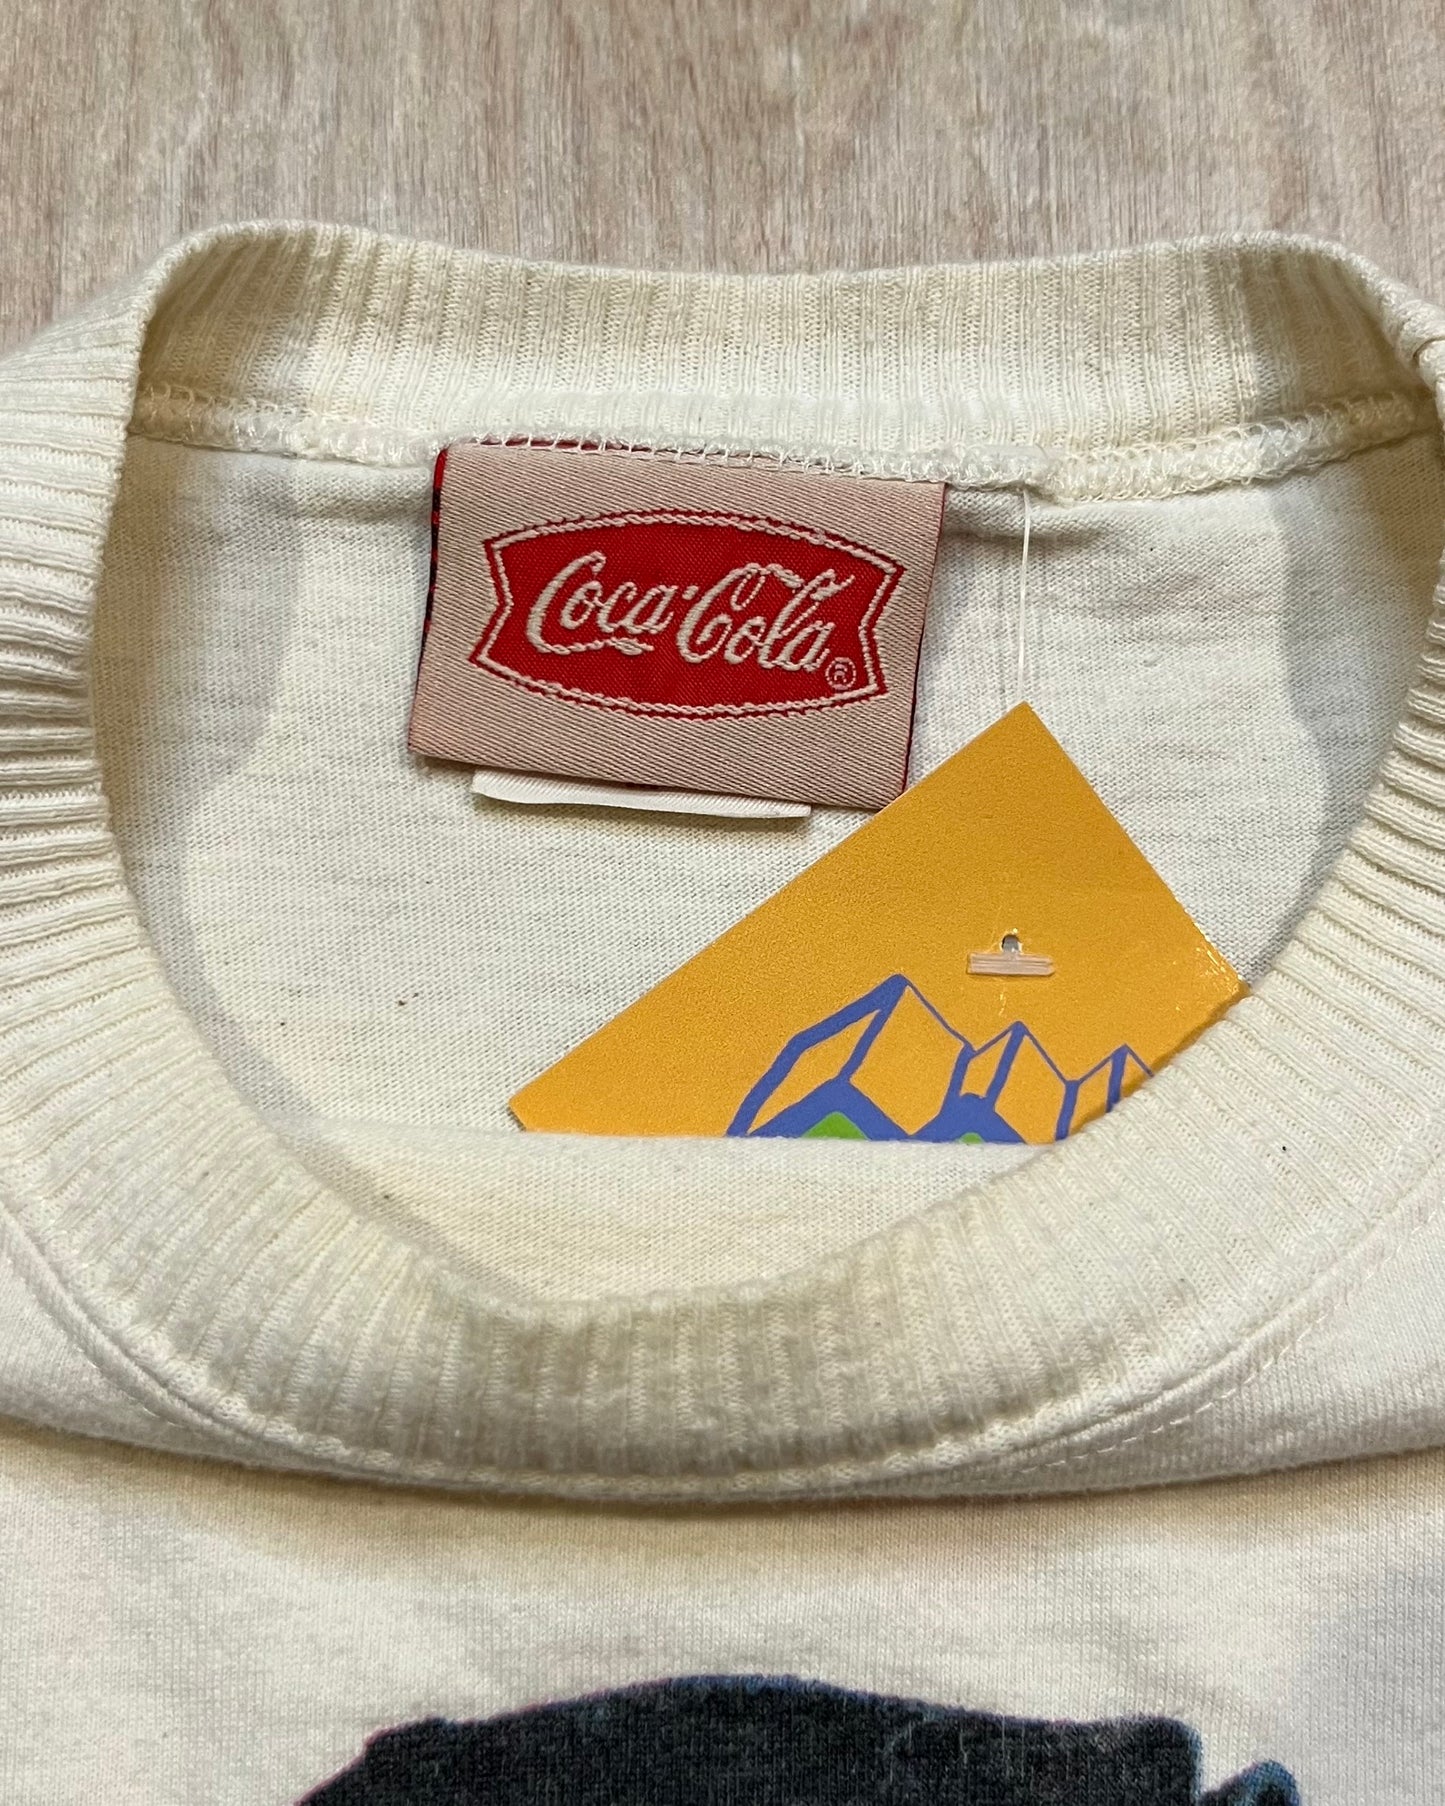 1993 Coca Cola "Work Refreshed" T-Shirt